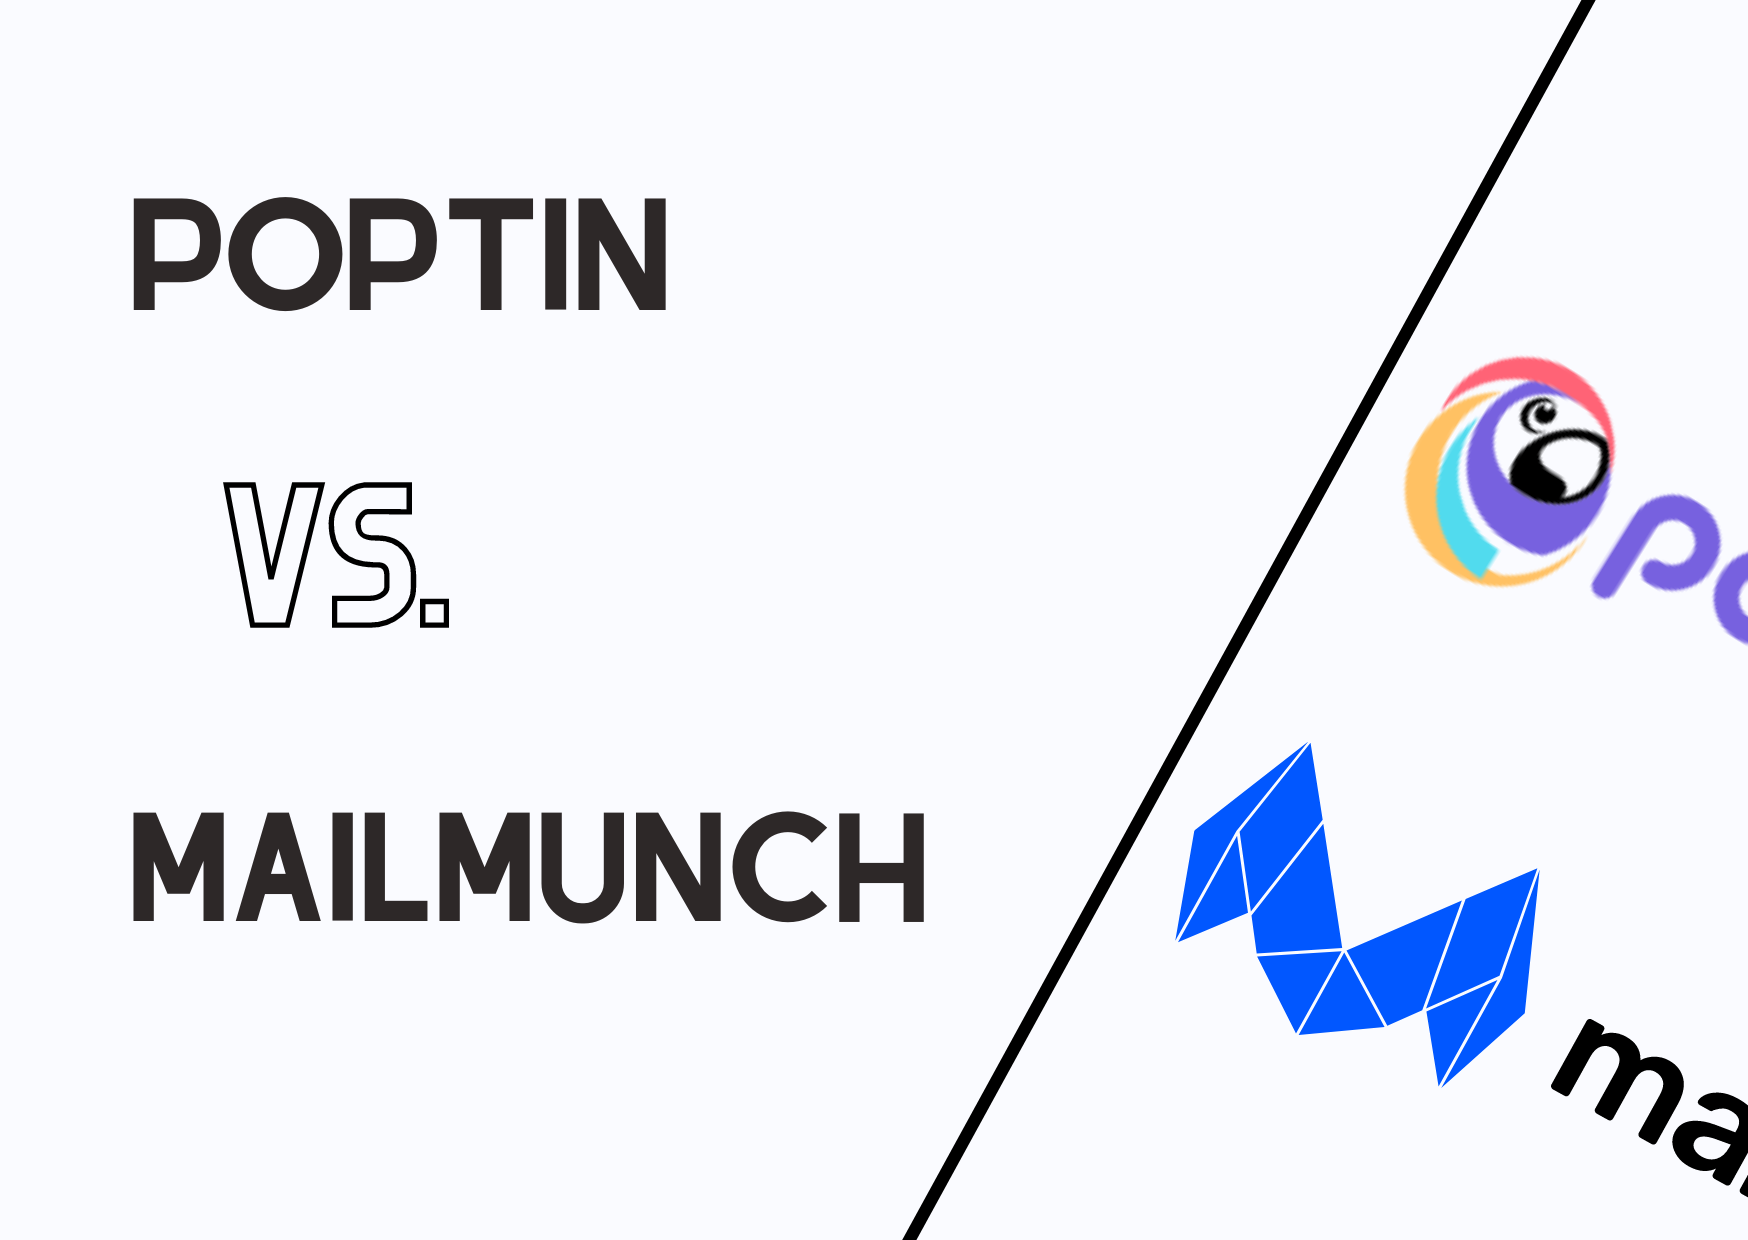 the banner to define the start of Poptin and Mailmunch features and details